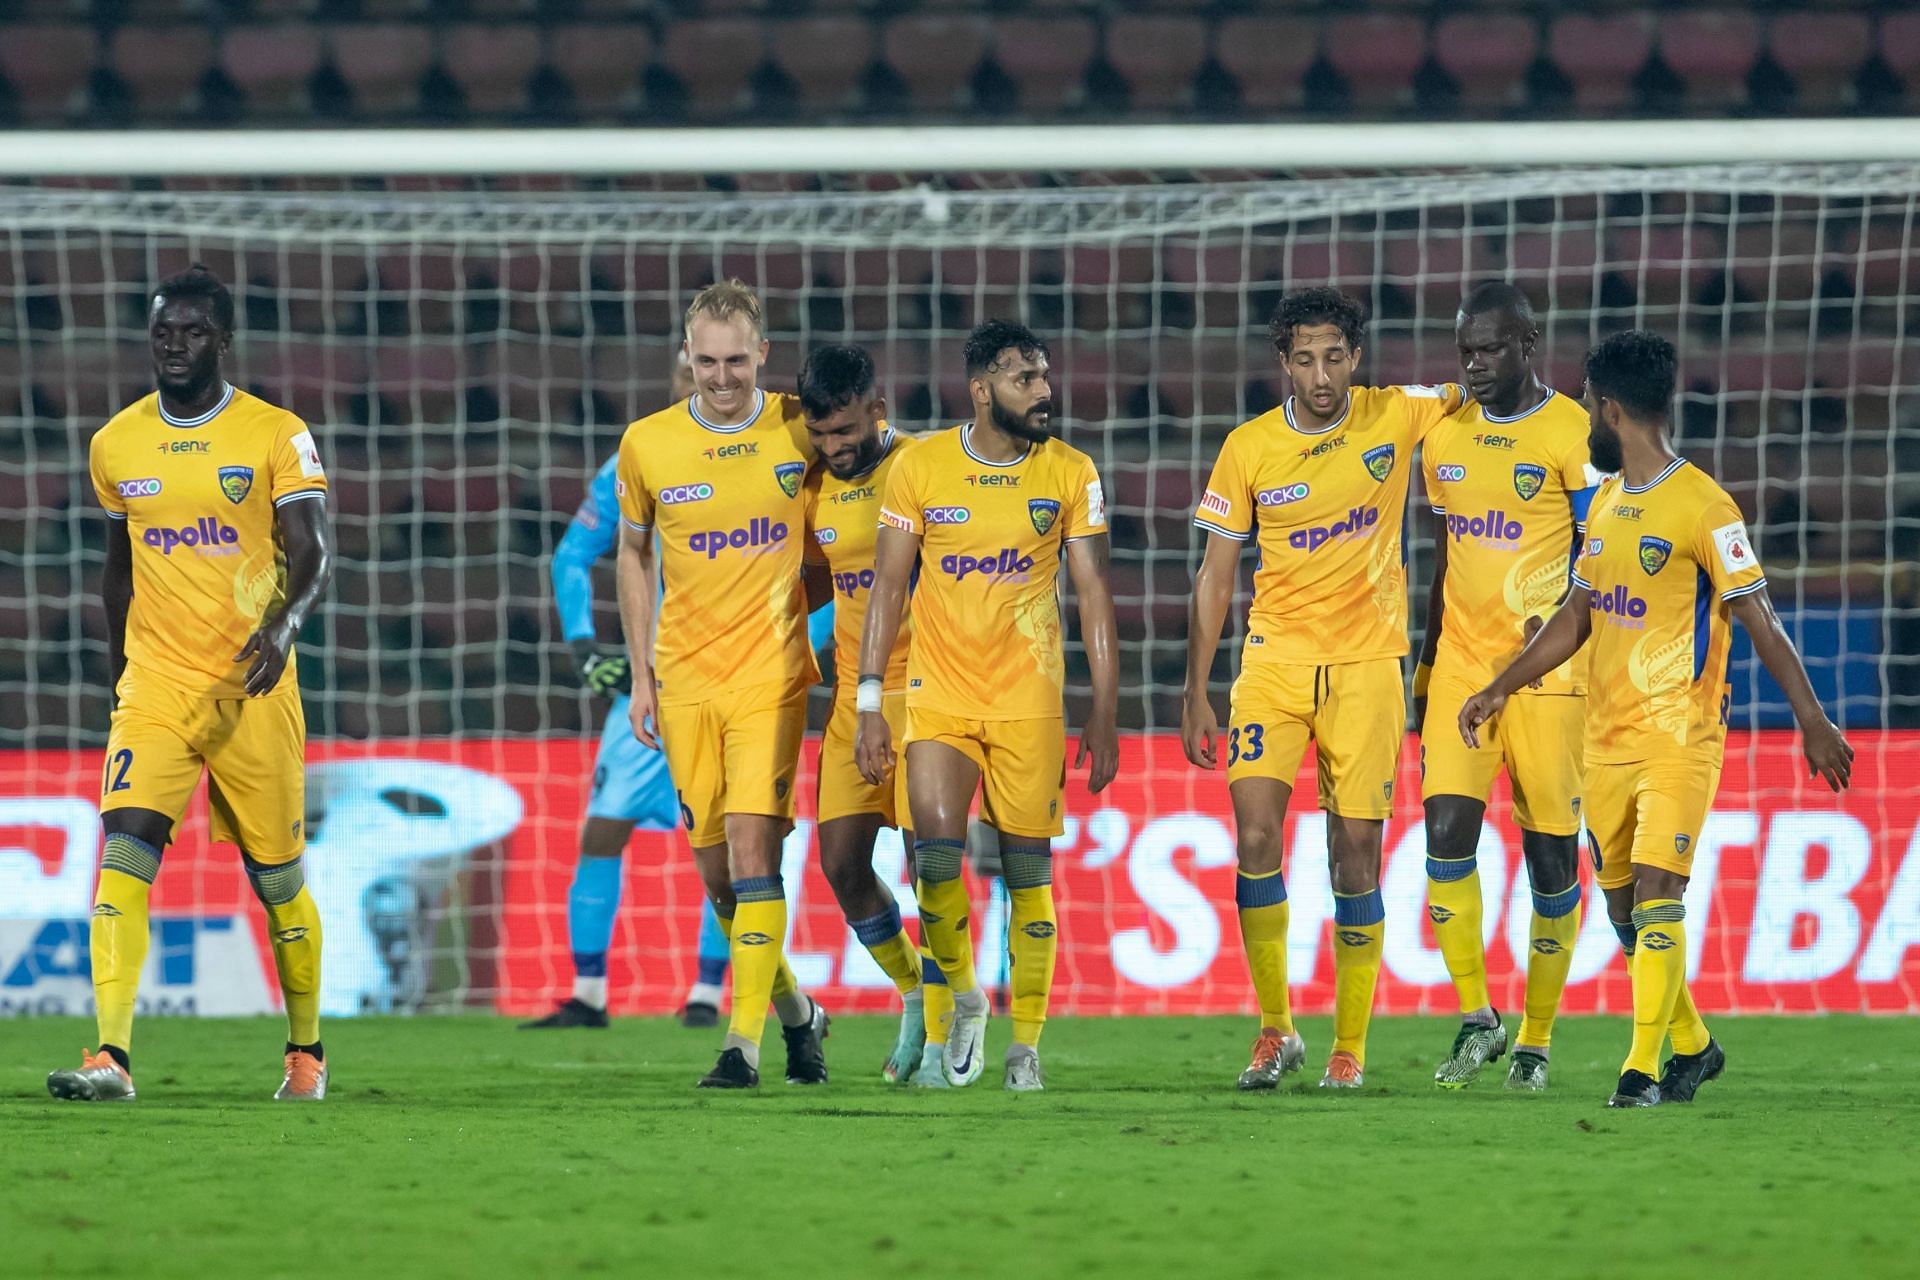 Chennaiyin FC in celebration mode as the team win 3-7 against NorthEast United FC.